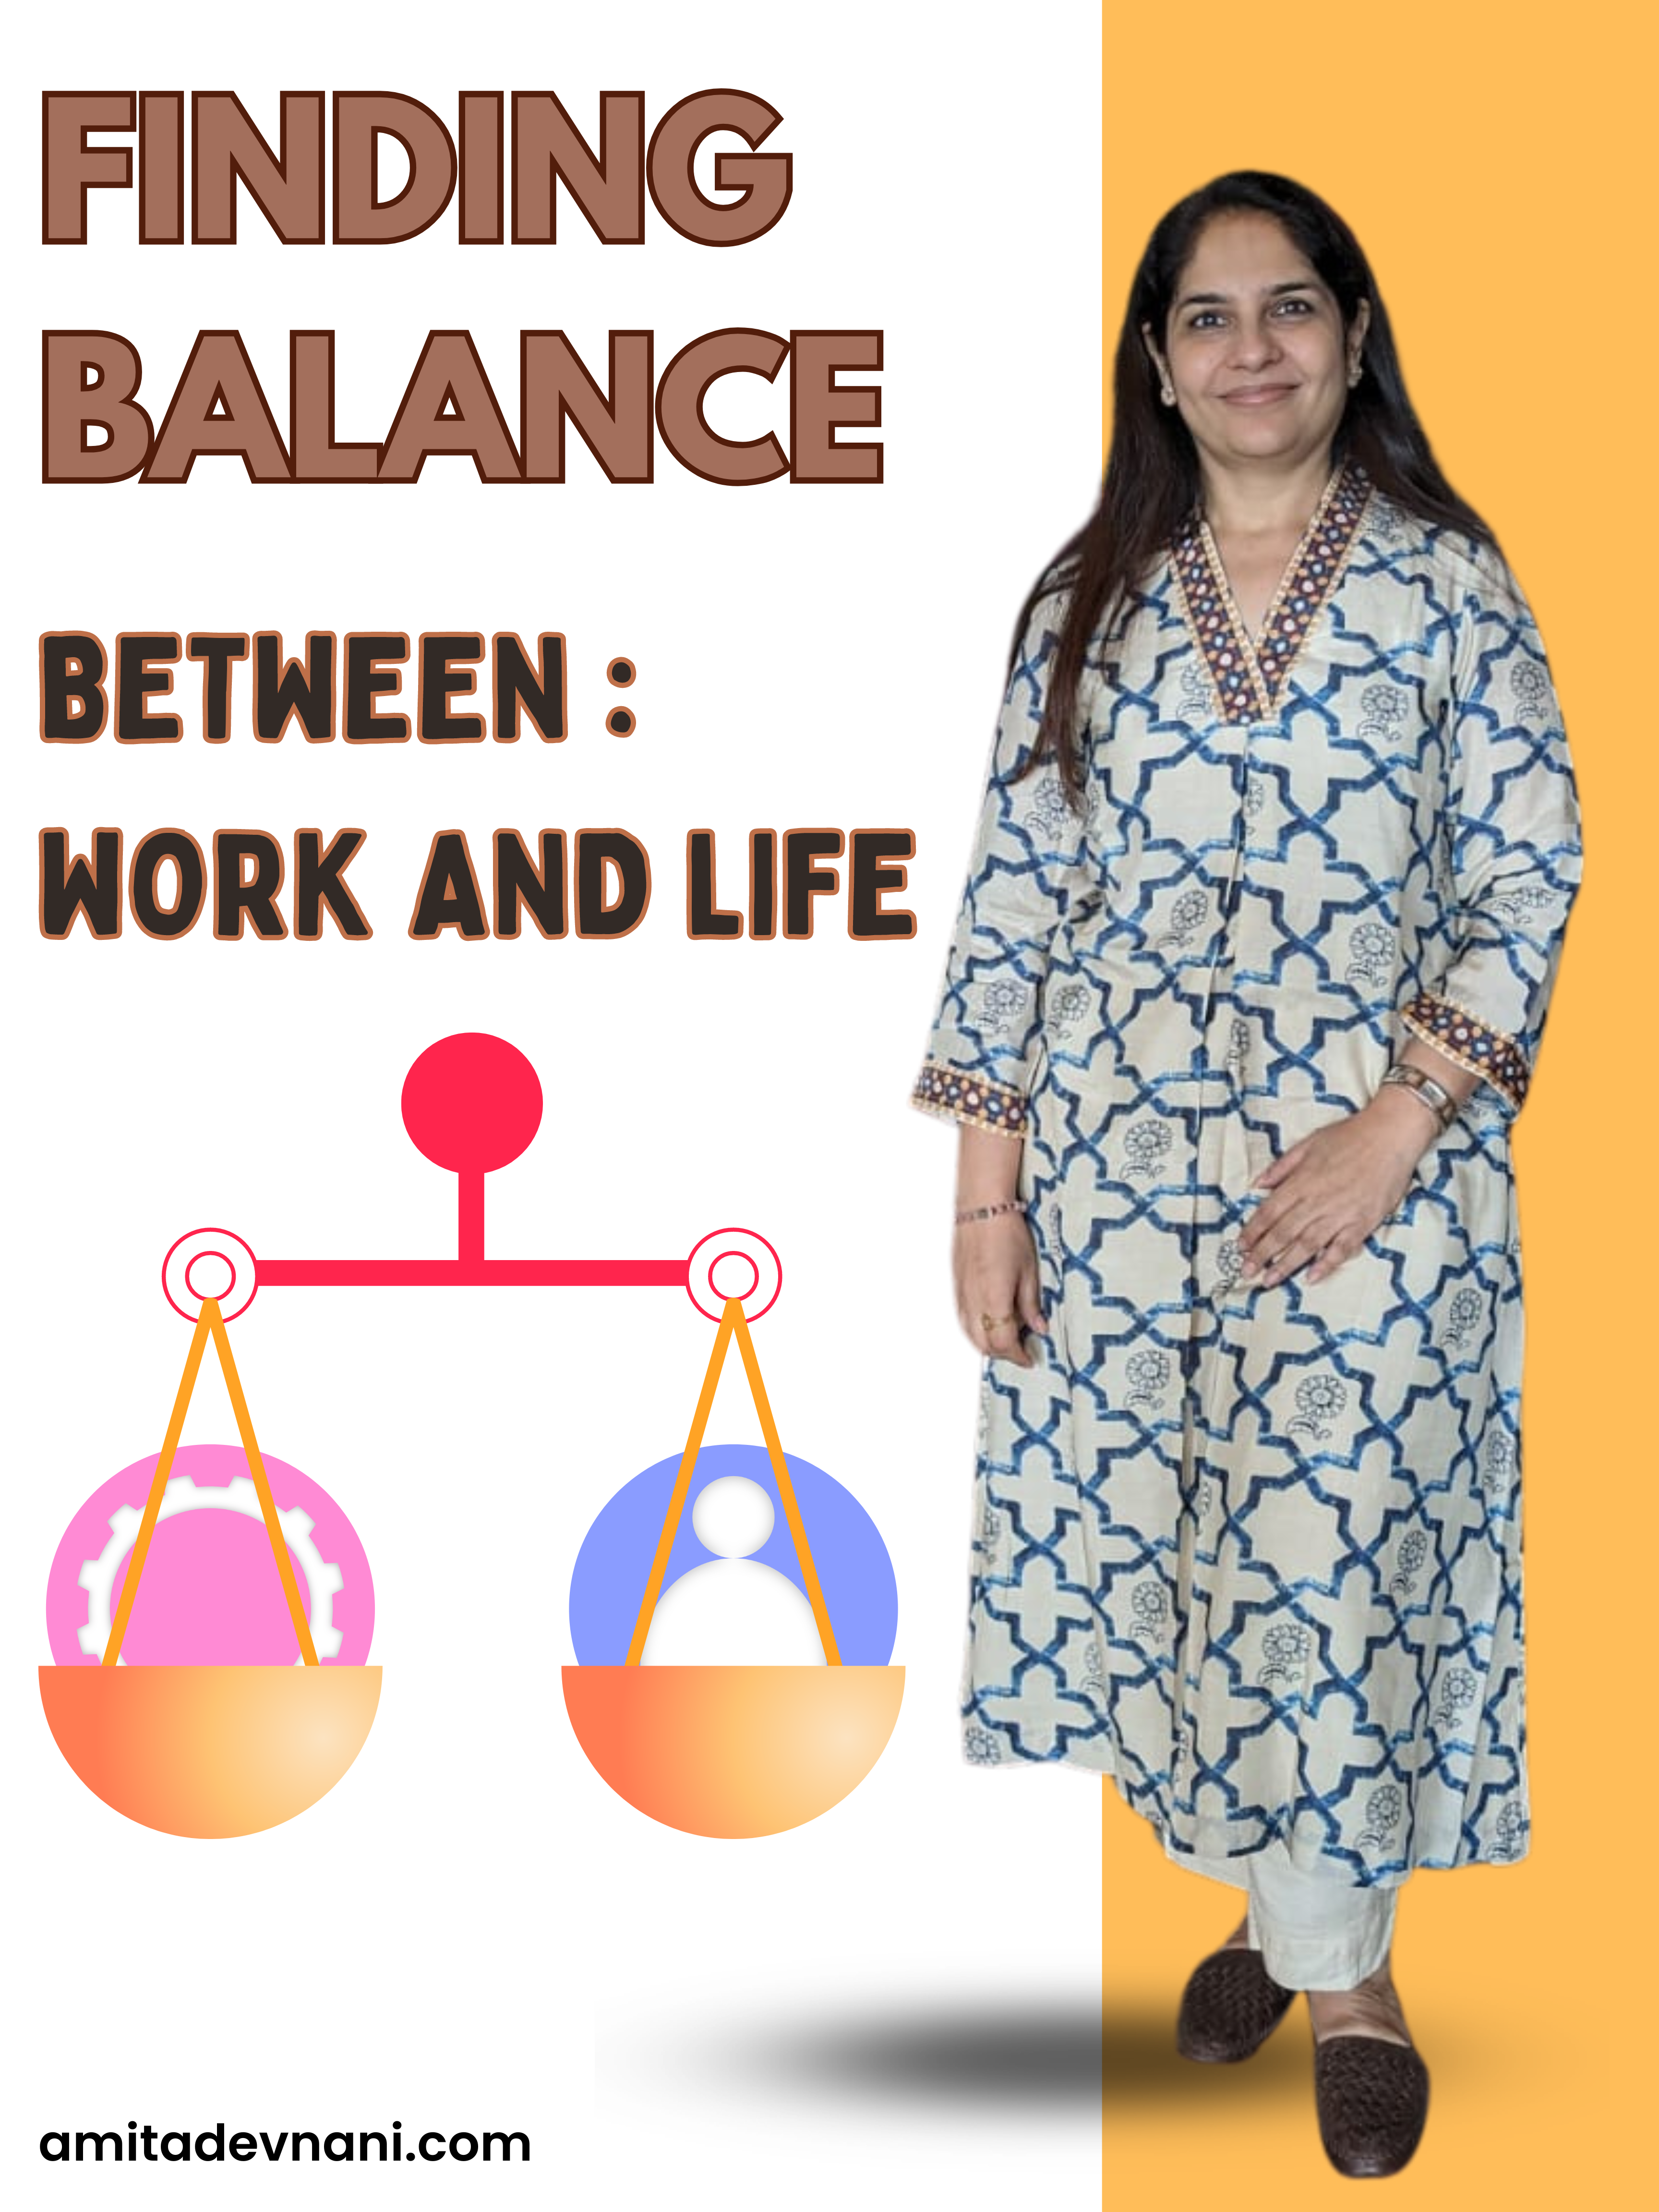 Finding Balance Between Work and Life